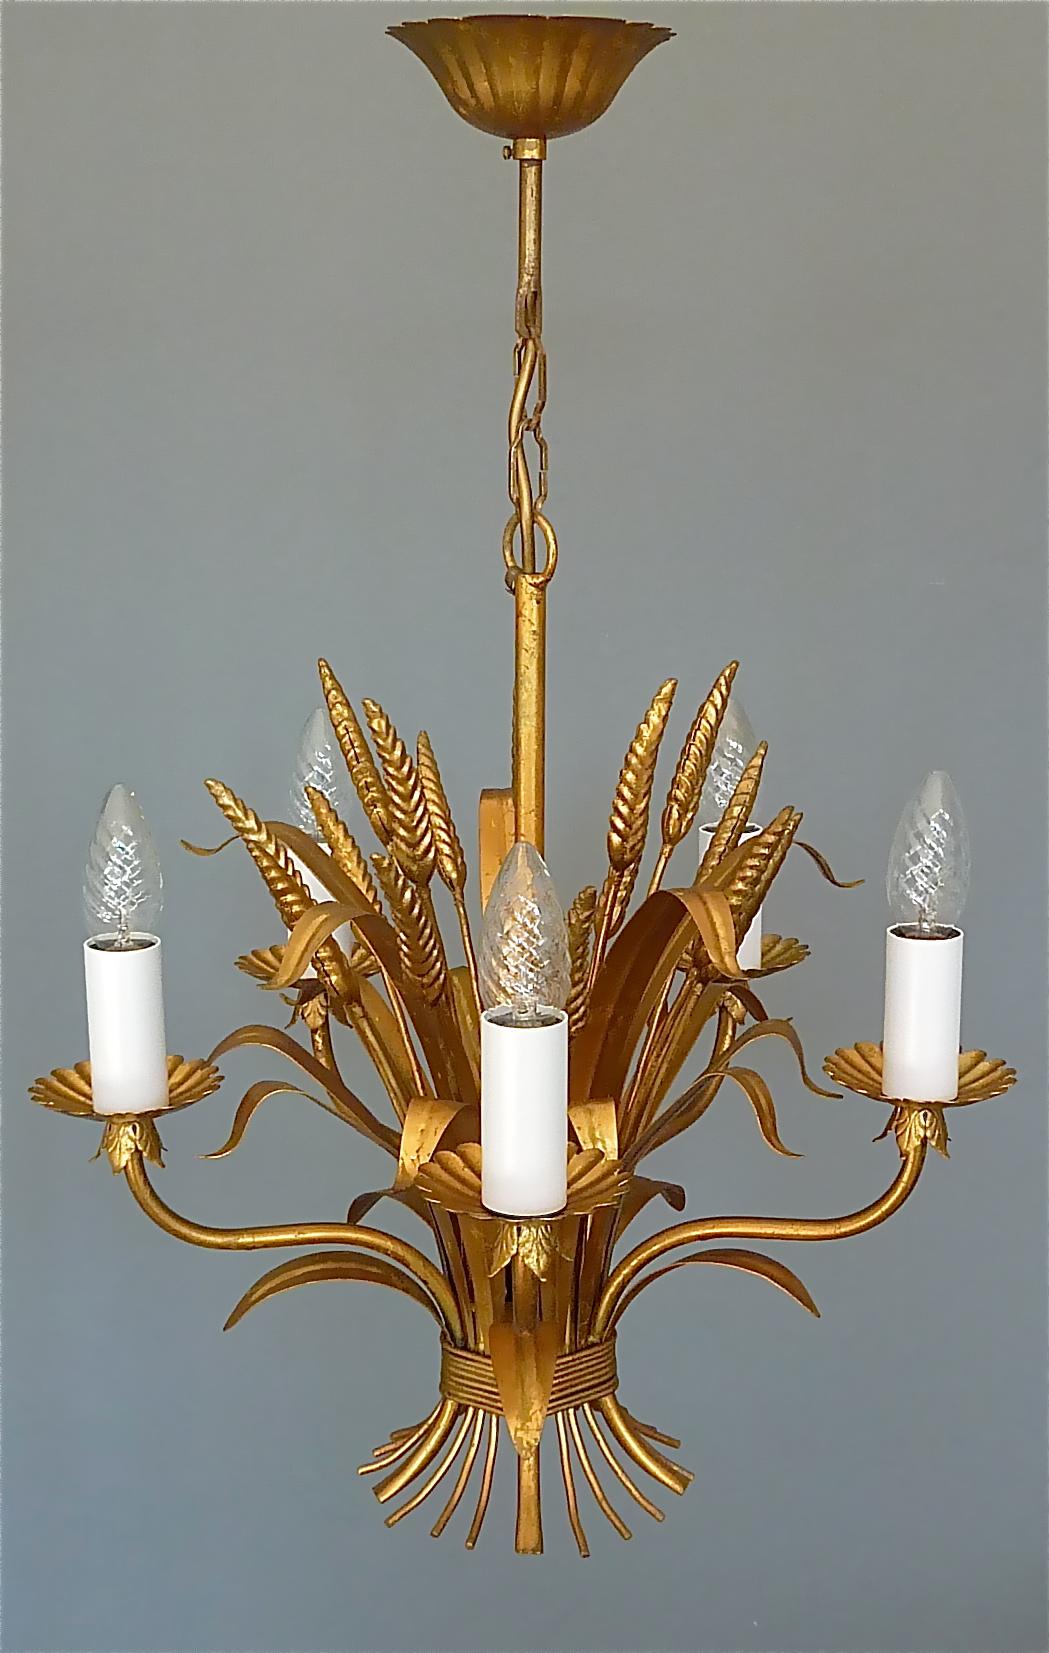 Gilt Italian Floral Sheaf of Wheat Five-Light Chandelier Coco Chanel Style, Kögl For Sale 4